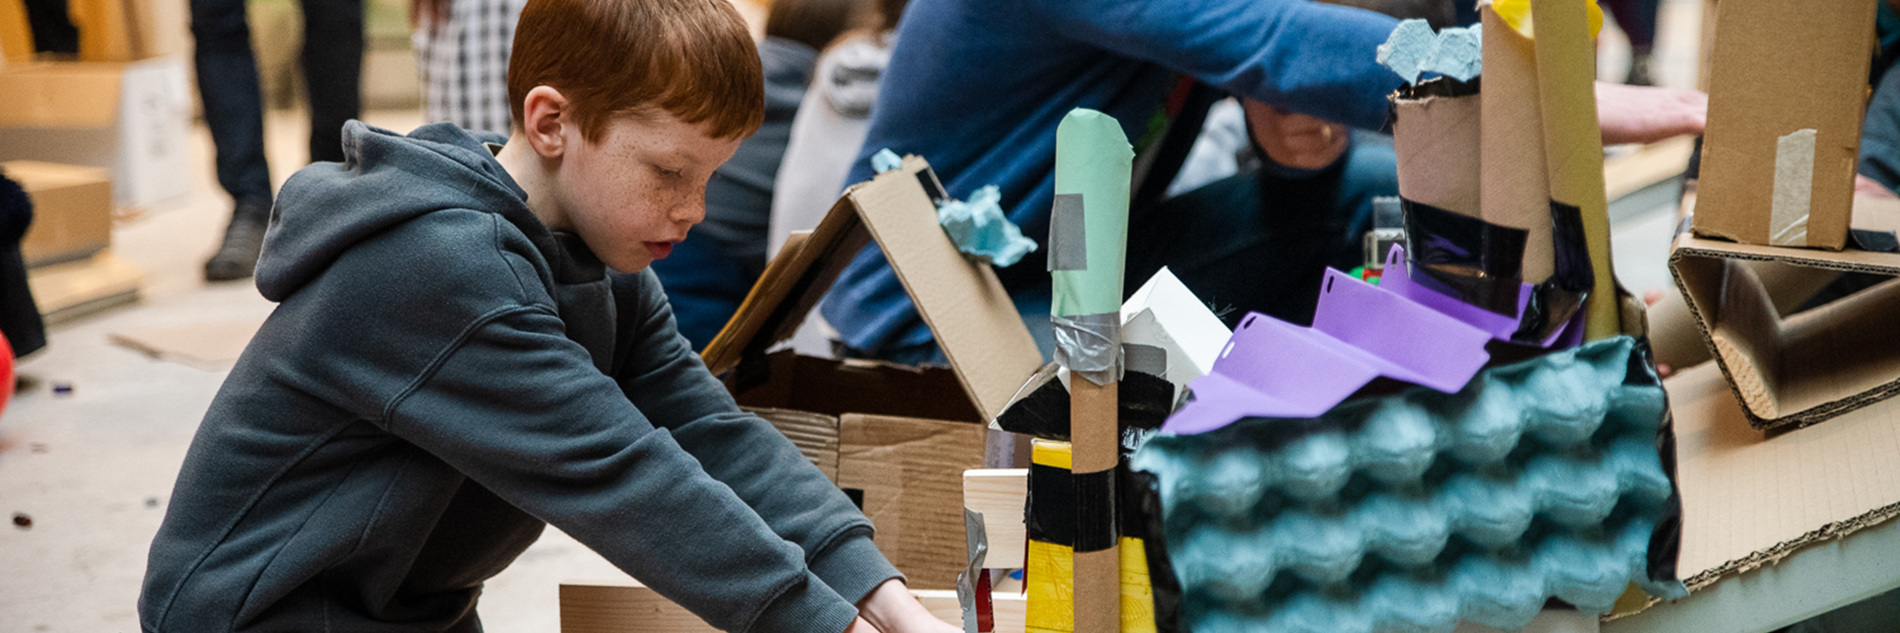 A child wearing a grey hoody and brown trousers kneeling on the floor works on a construction made of cardboard packaging and tubes, crates and gaffer tape. In the background adults and children work on other constructions.